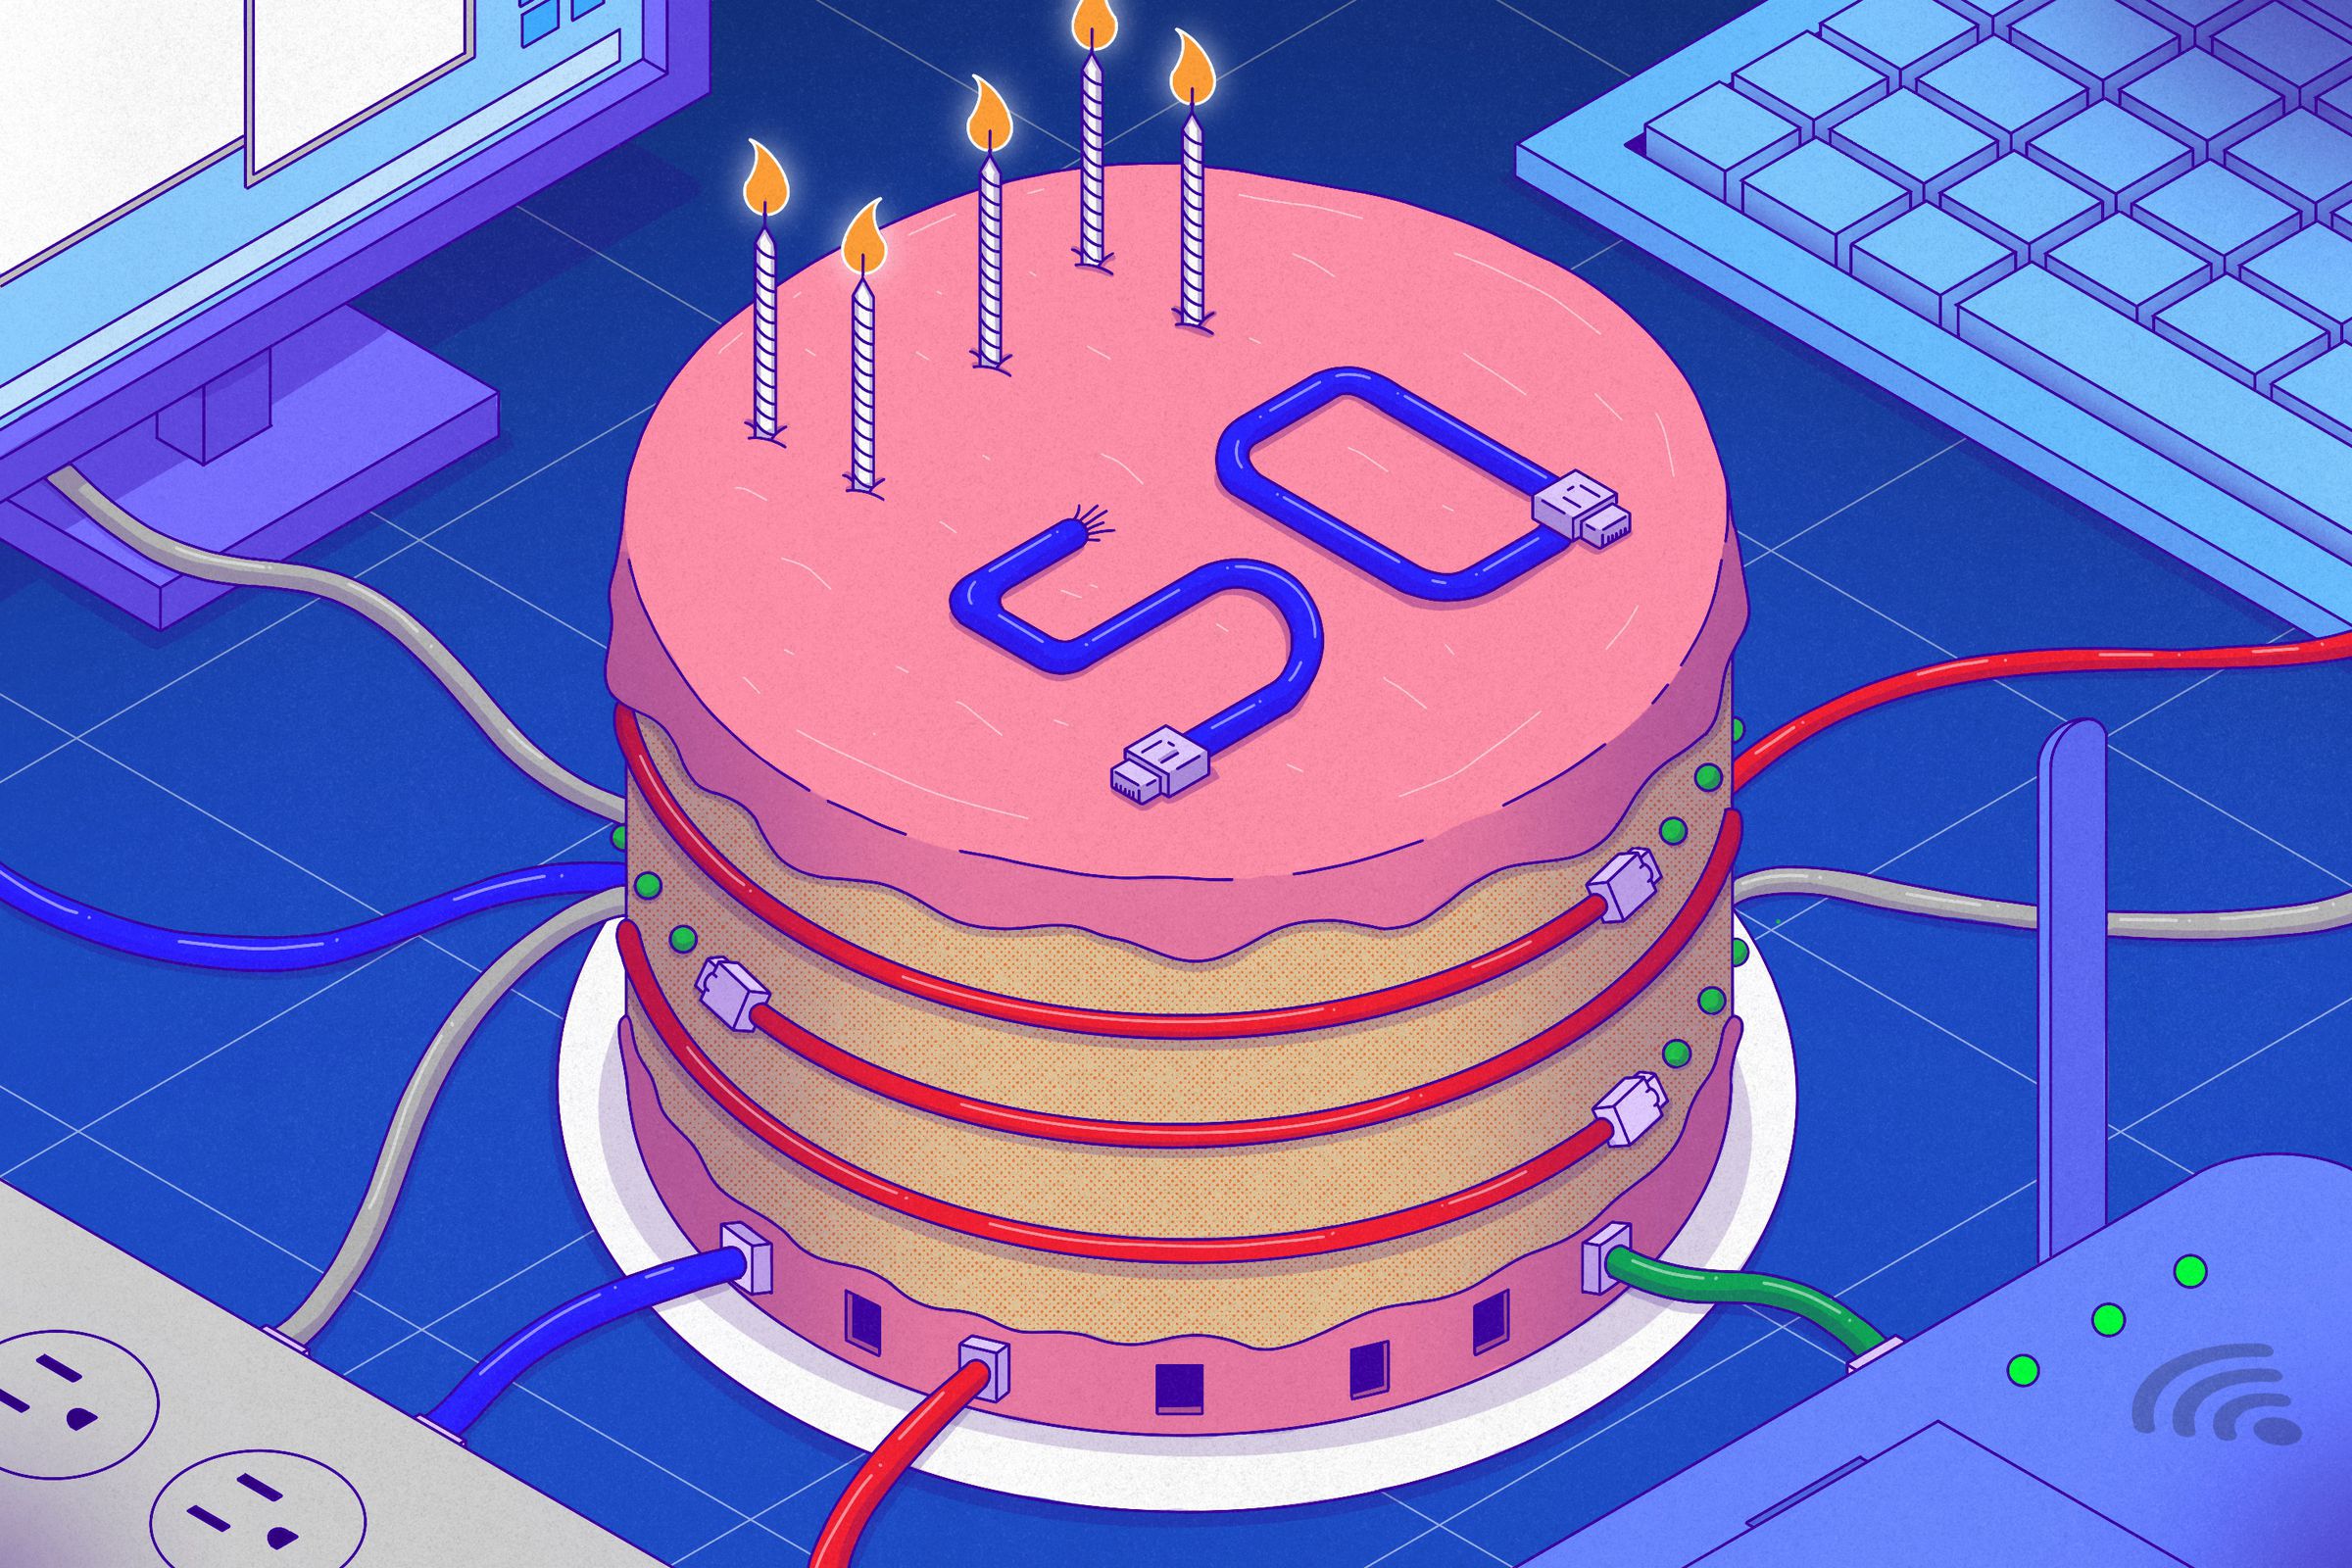 An illustrated birthday cake with the number 50 spelled out with ethernet cables, surrounded by a keyboard, Wi-Fi router, computer monitor, and other ethernet cables.